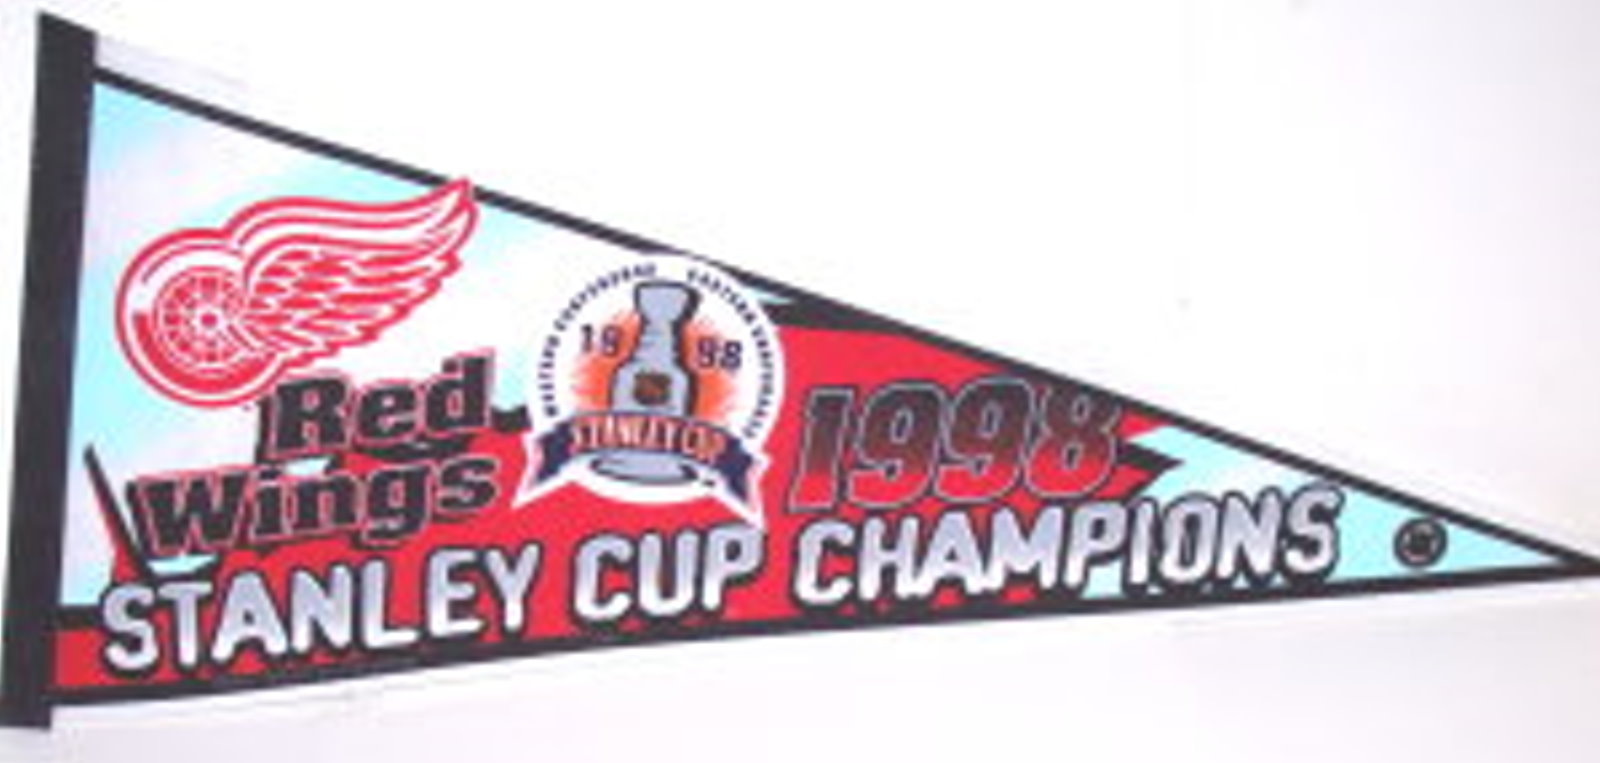 Detroit Red Wings 1998 Stanley Cup Champions Pennant